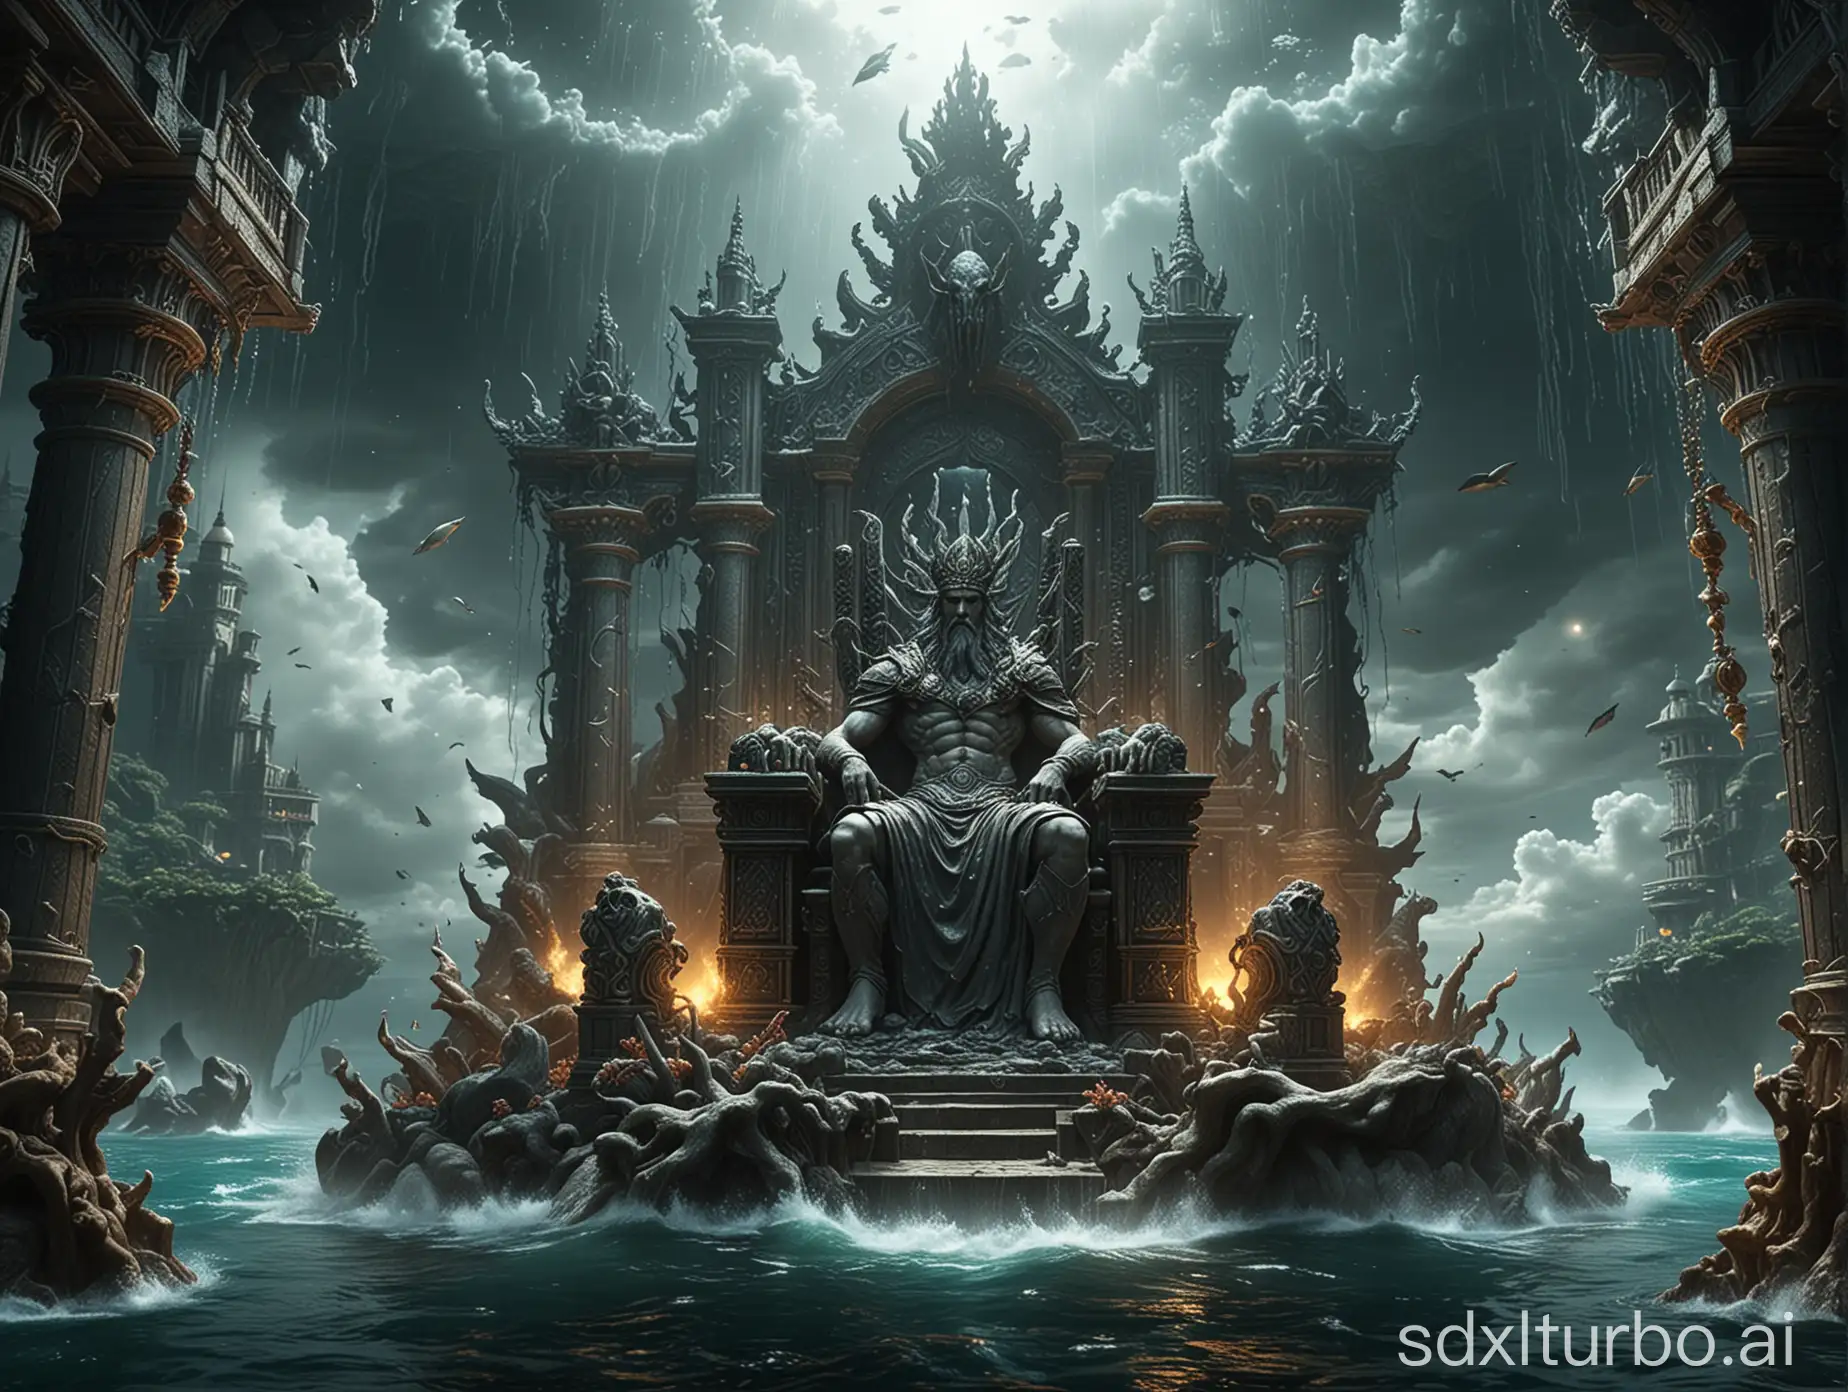 Poseidons-Coral-Palace-Undersea-Kingdom-with-Golden-Throne-and-Sea-Monster